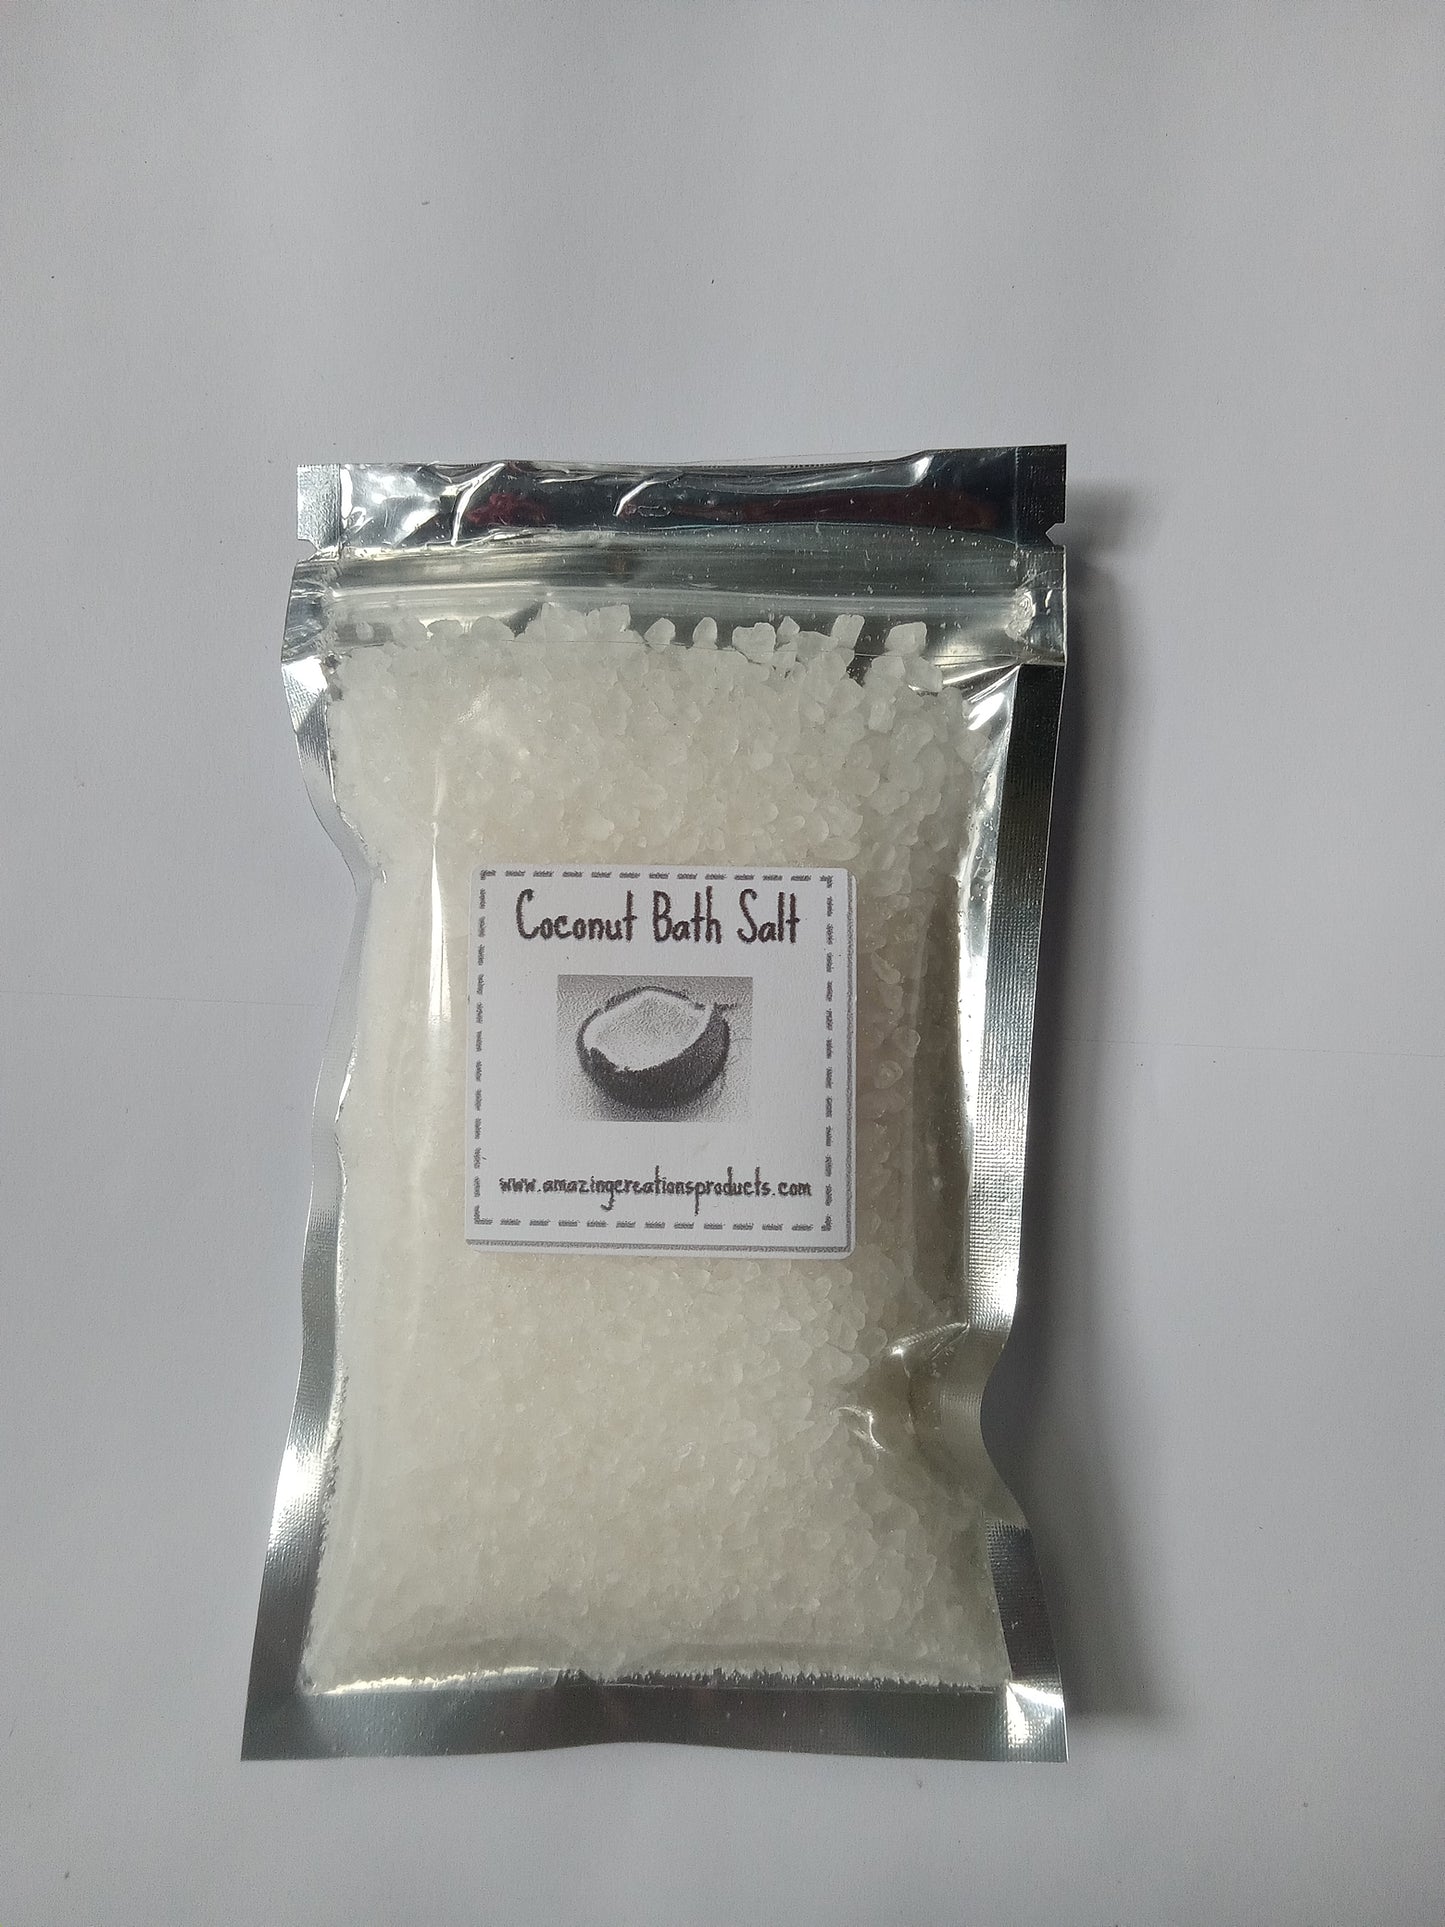  Coconut Bath Salt -  available at Amazing Creations Products . Grab yours for $11 today!